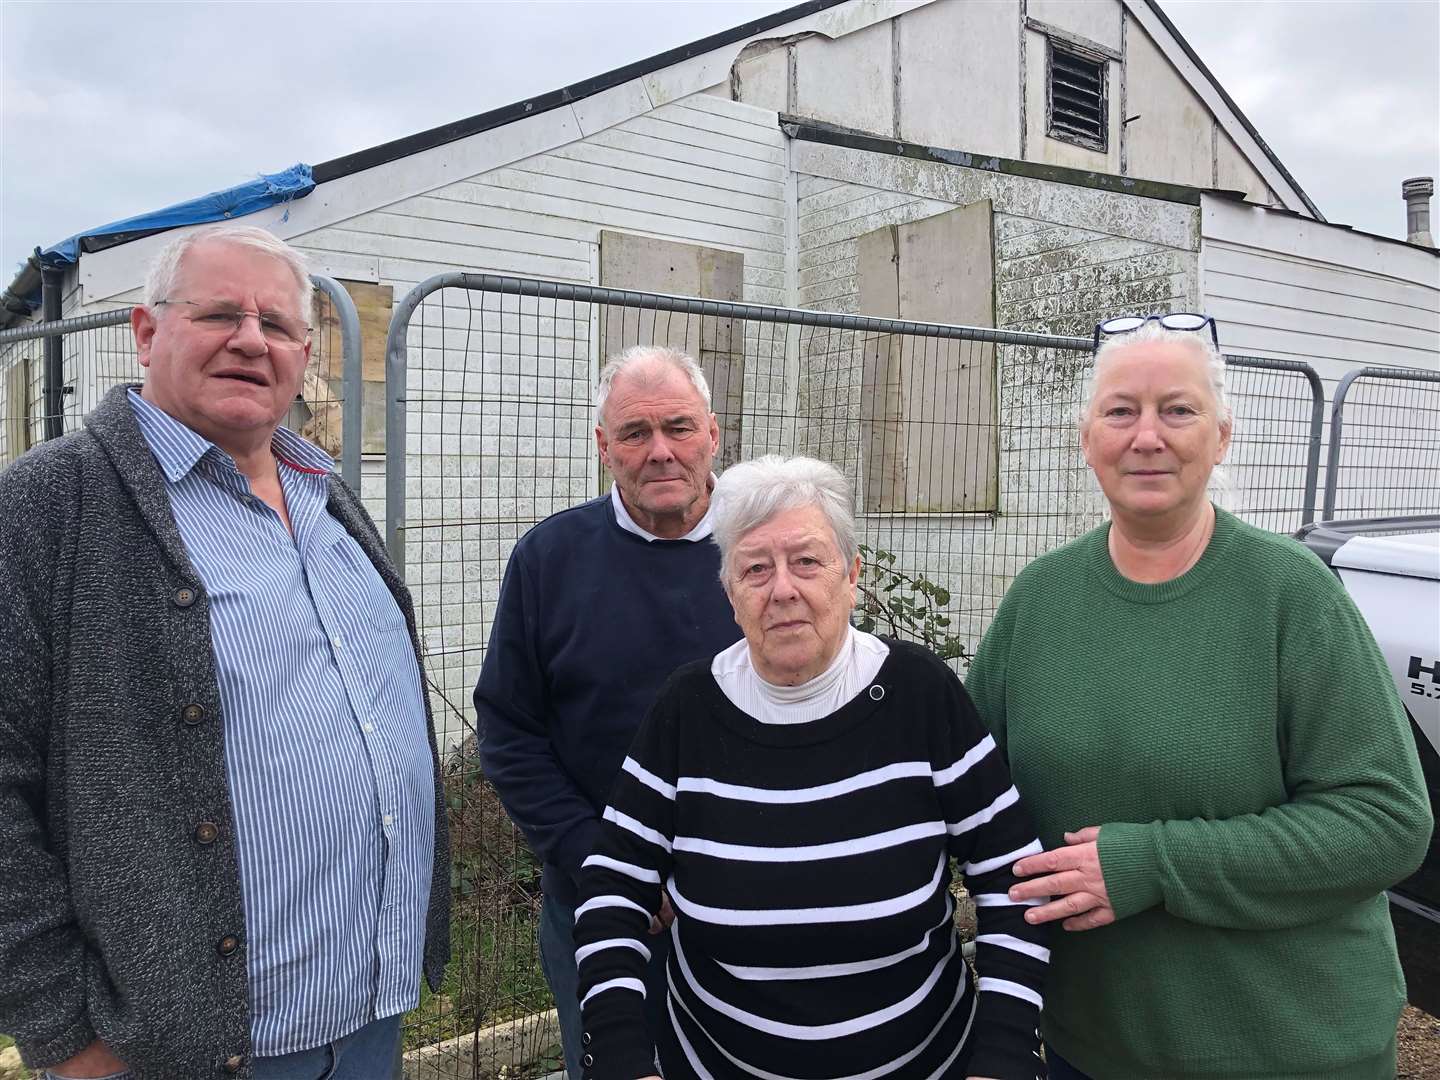 Wayne Hick, Keith Wheeldon, Joy Beale and Patricia Barker are all in favour of the plans to demolish the hall